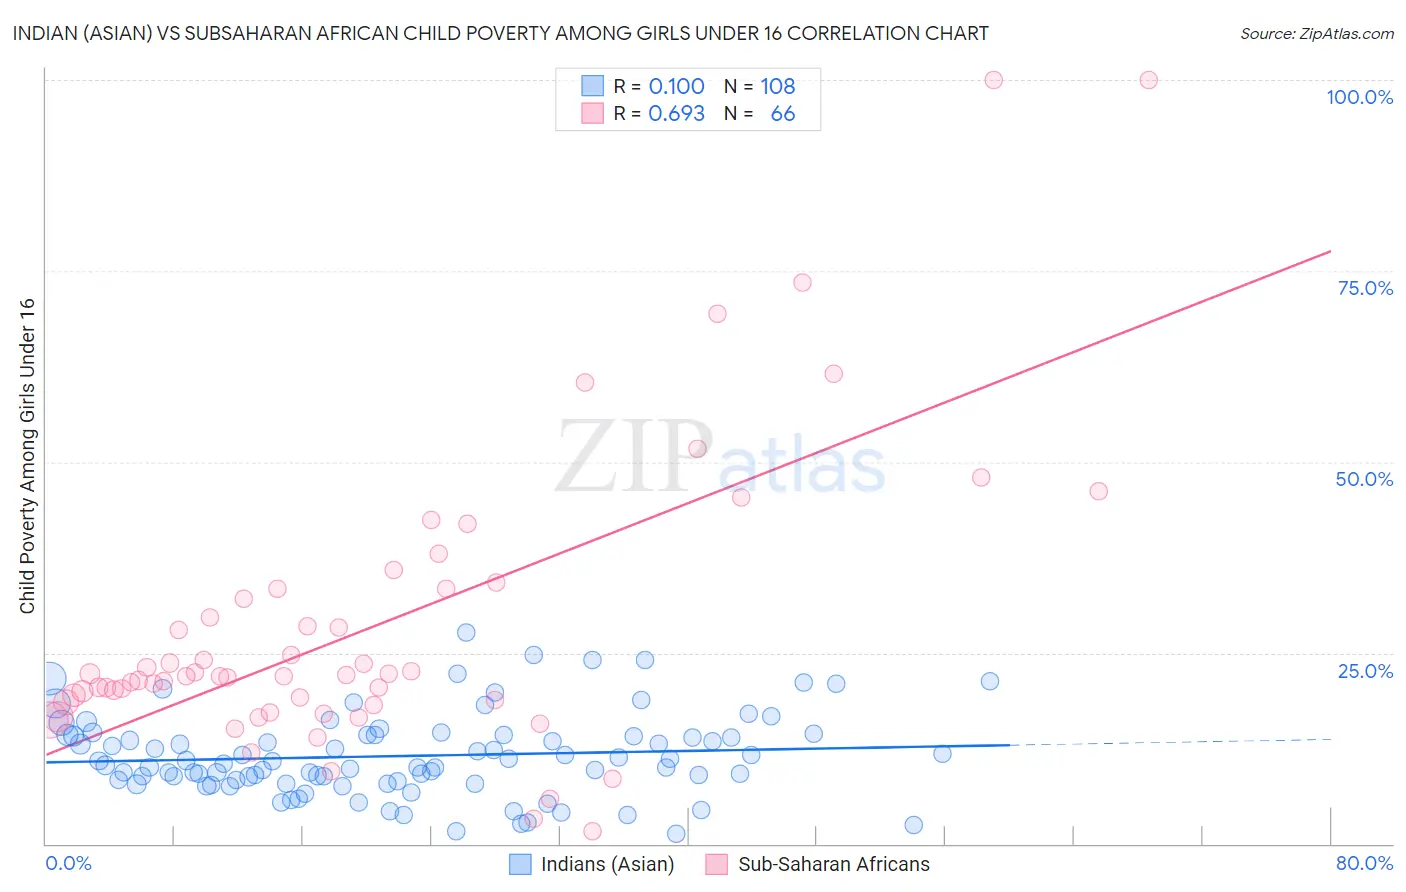 Indian (Asian) vs Subsaharan African Child Poverty Among Girls Under 16